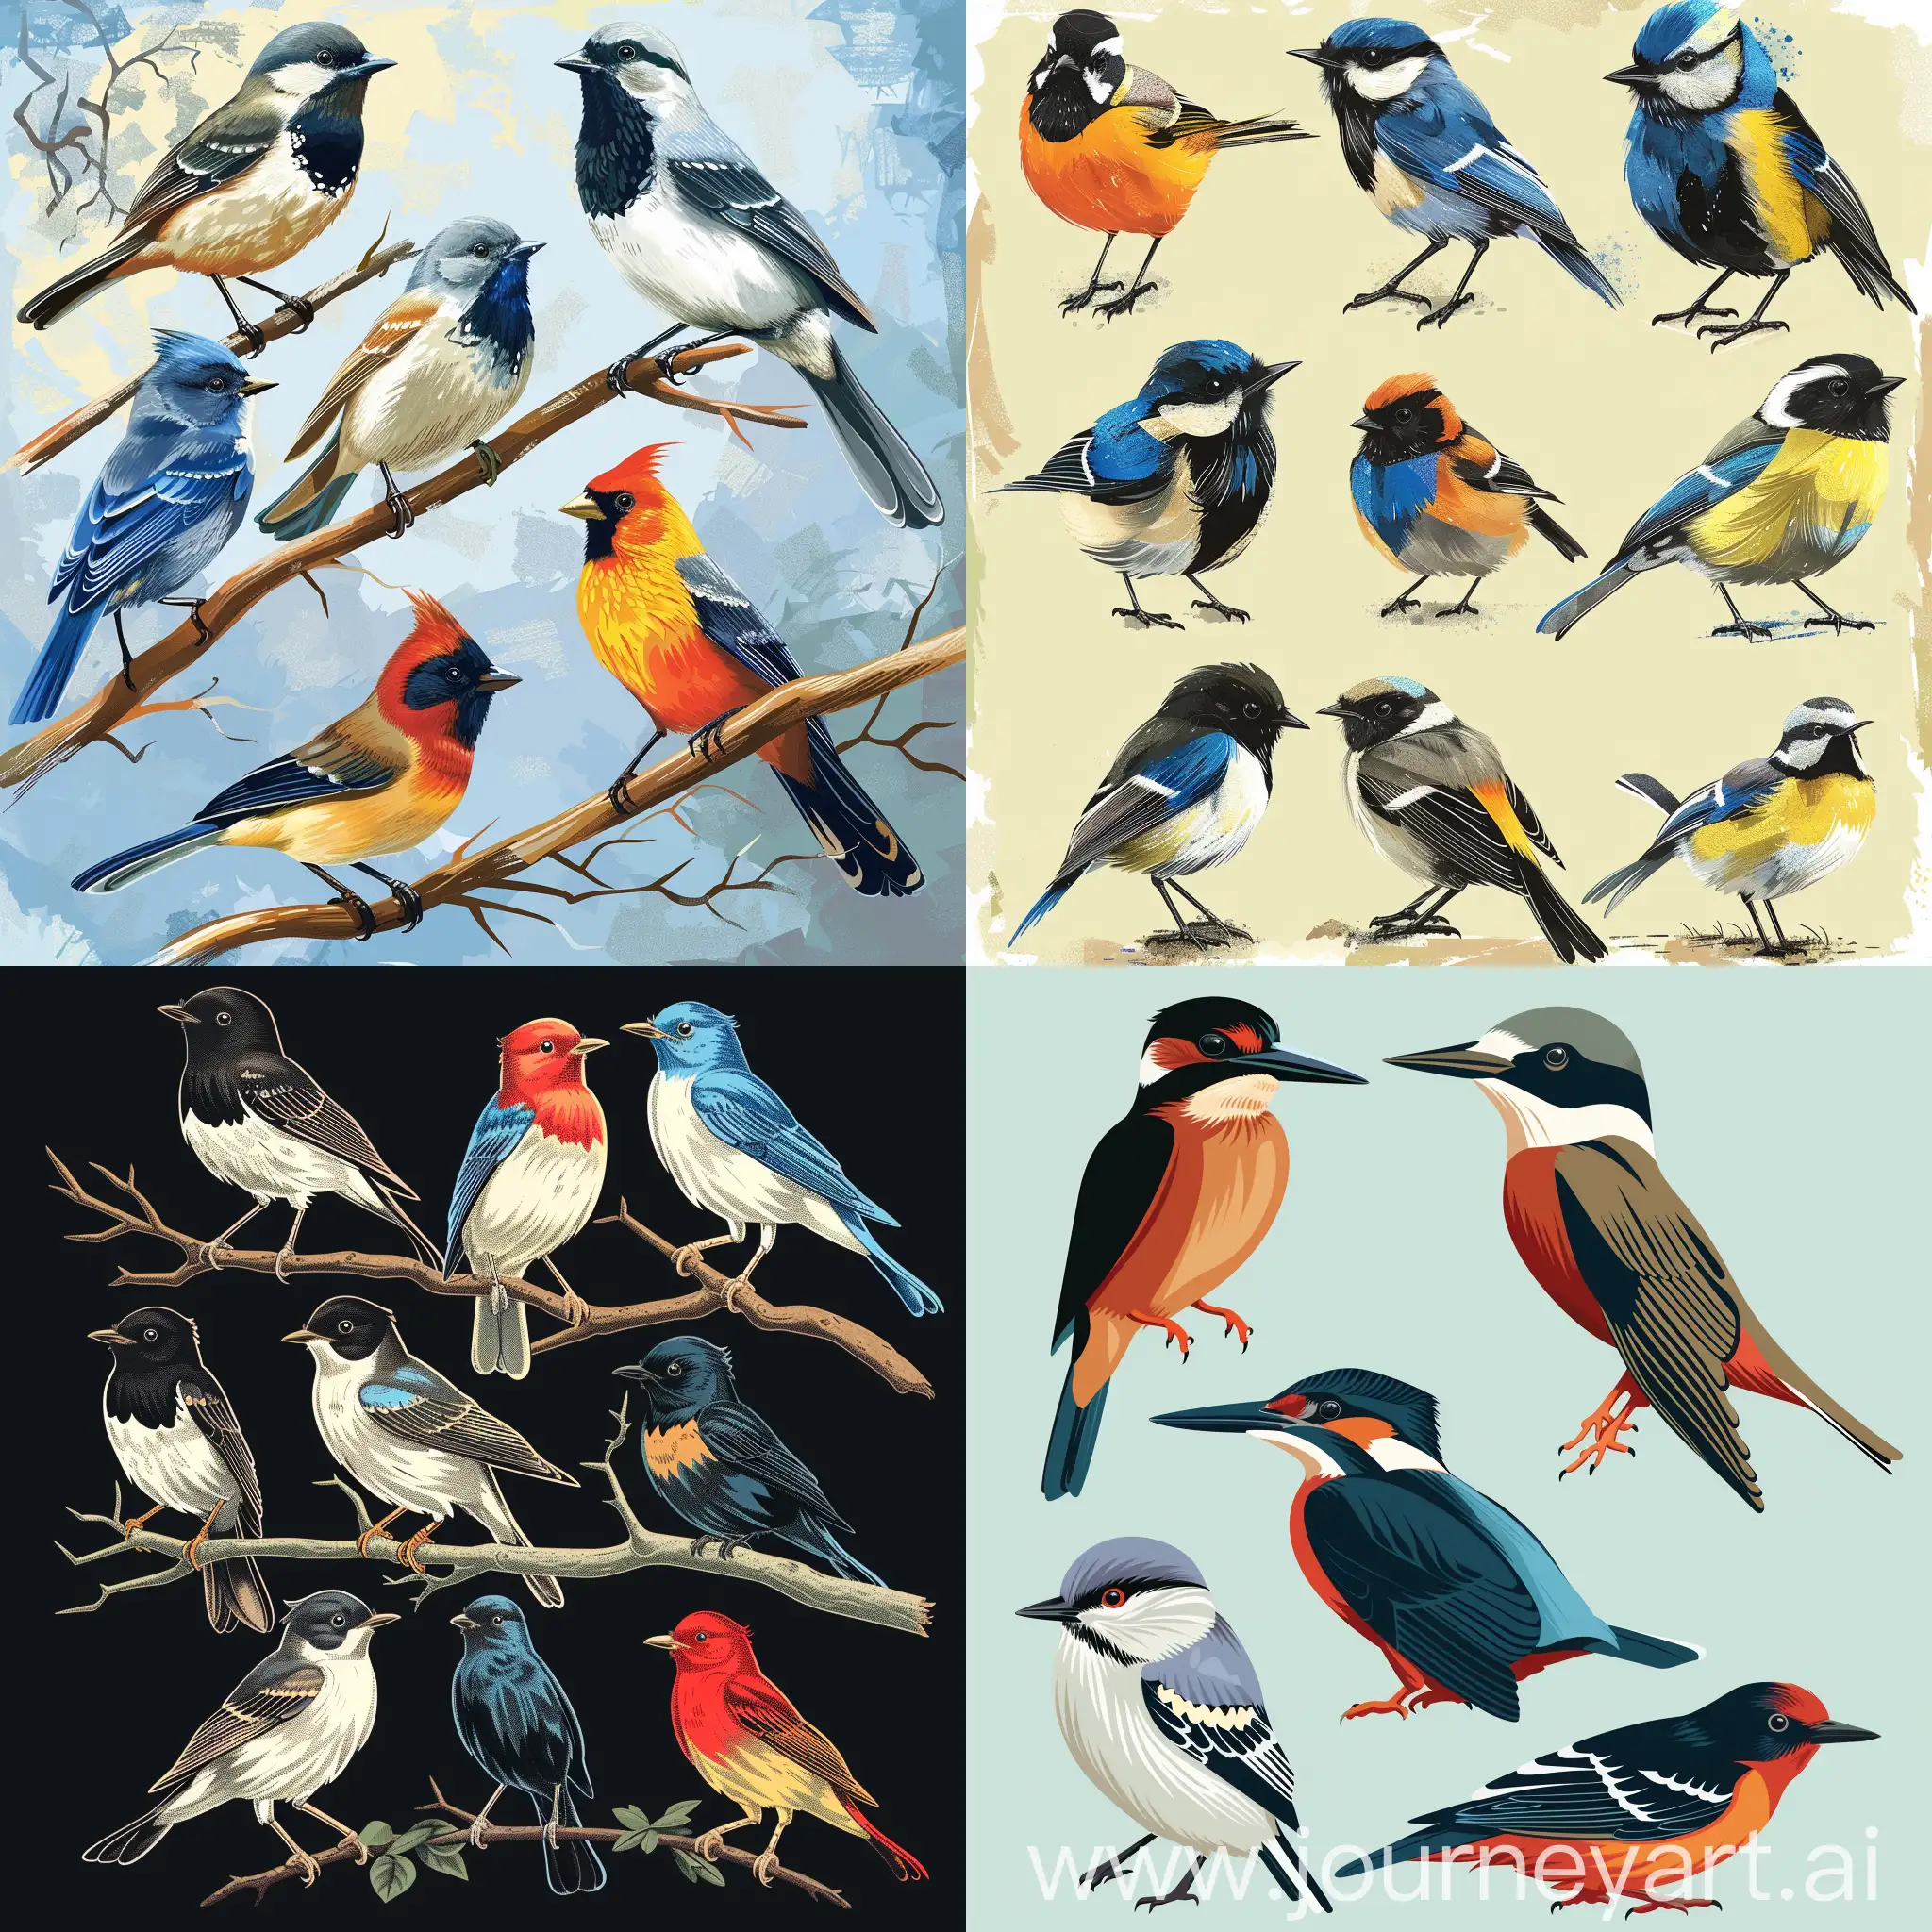 Water's day, several birds by Rafal Olbinski, in high quality vector style